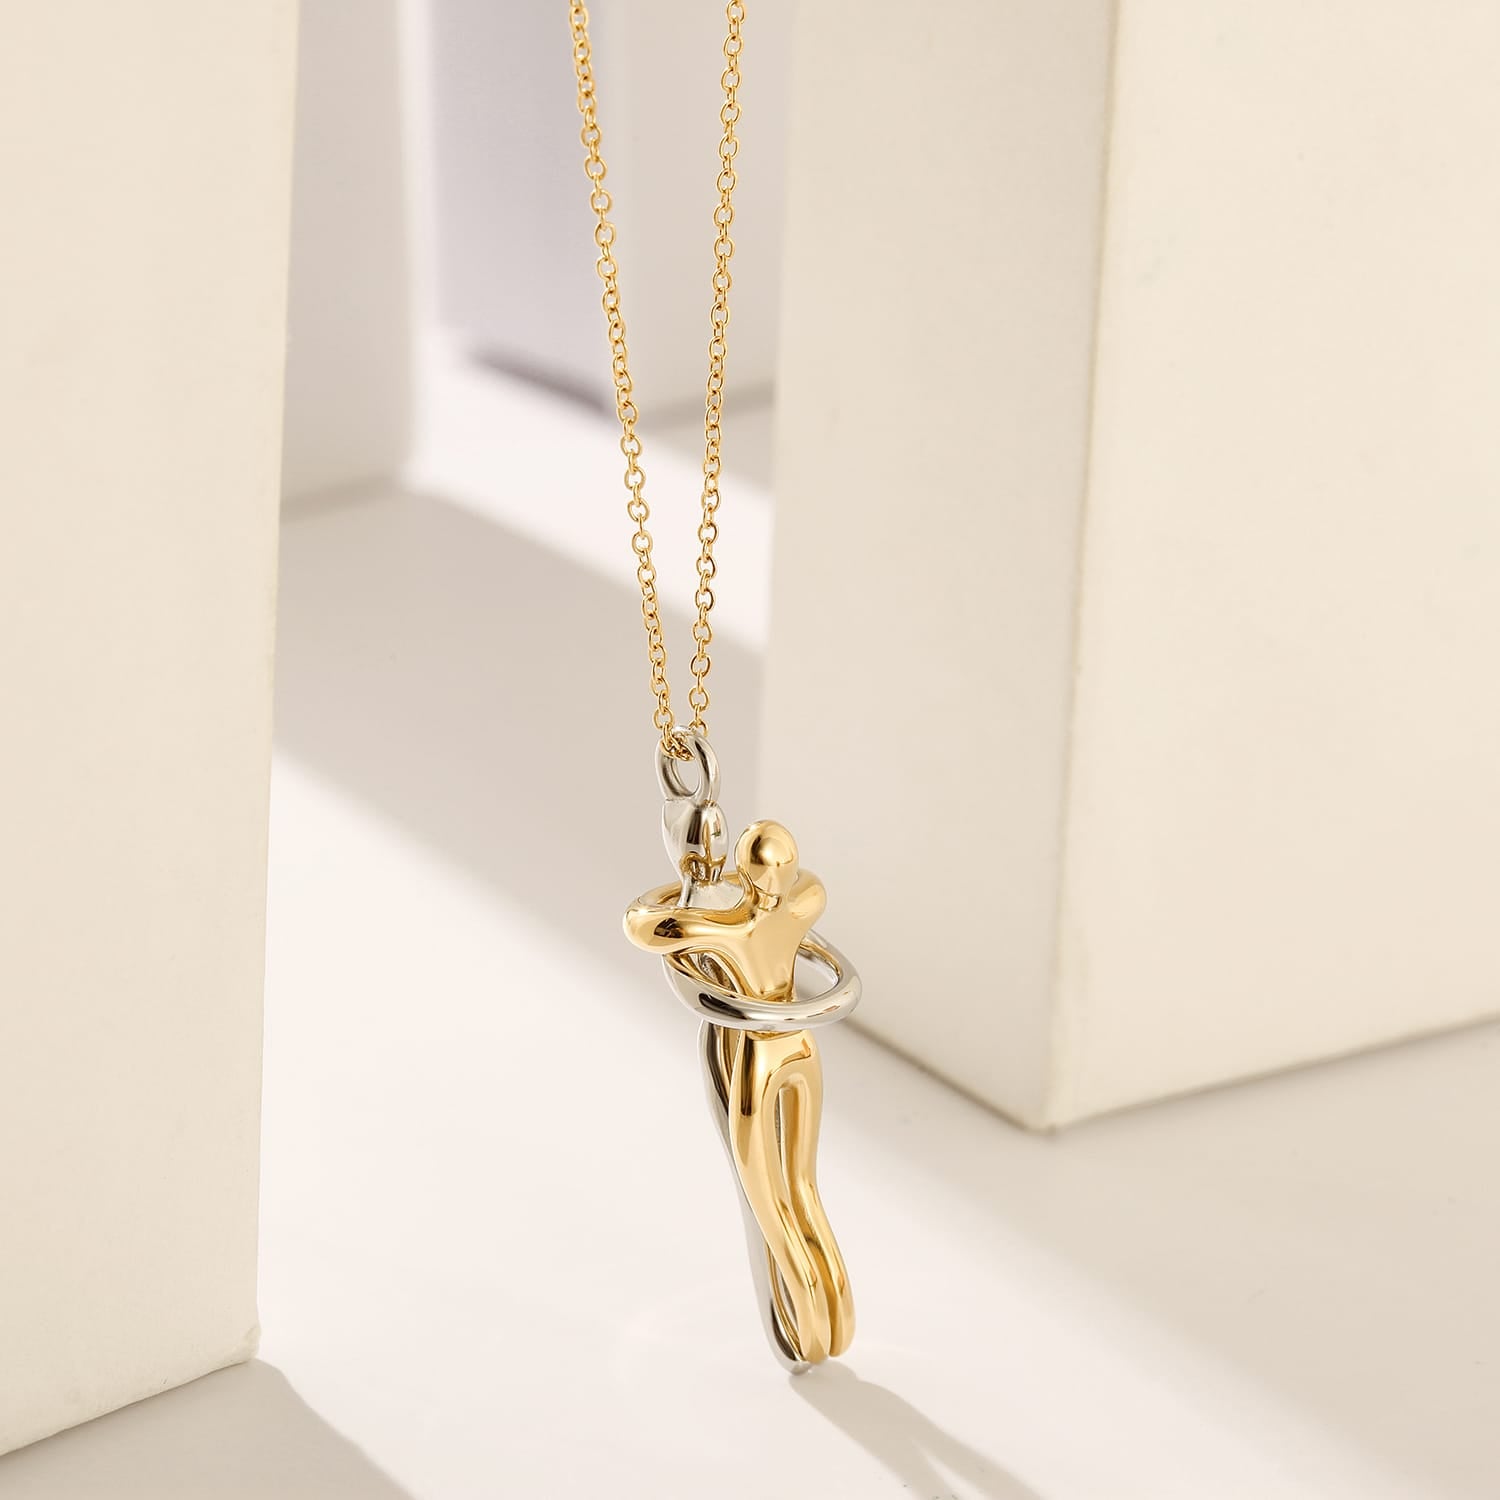 Gold Love and Hug Necklace